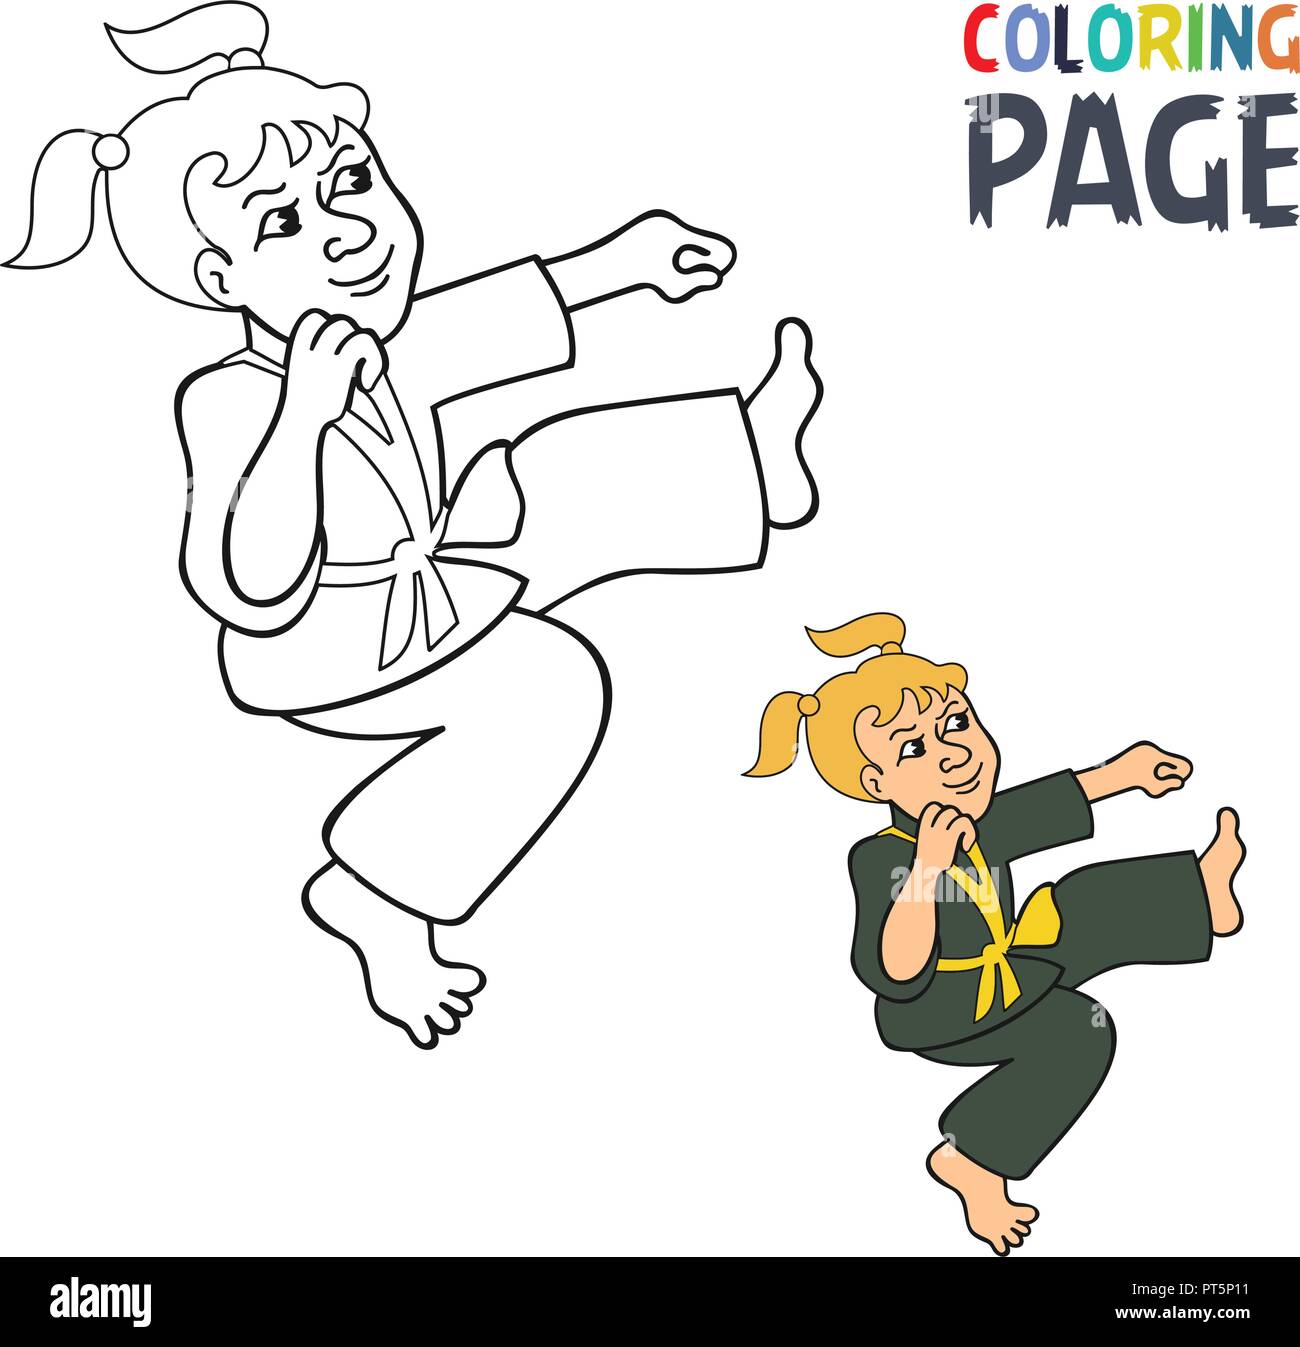 coloring page with woman martial art cartoon Stock Vector